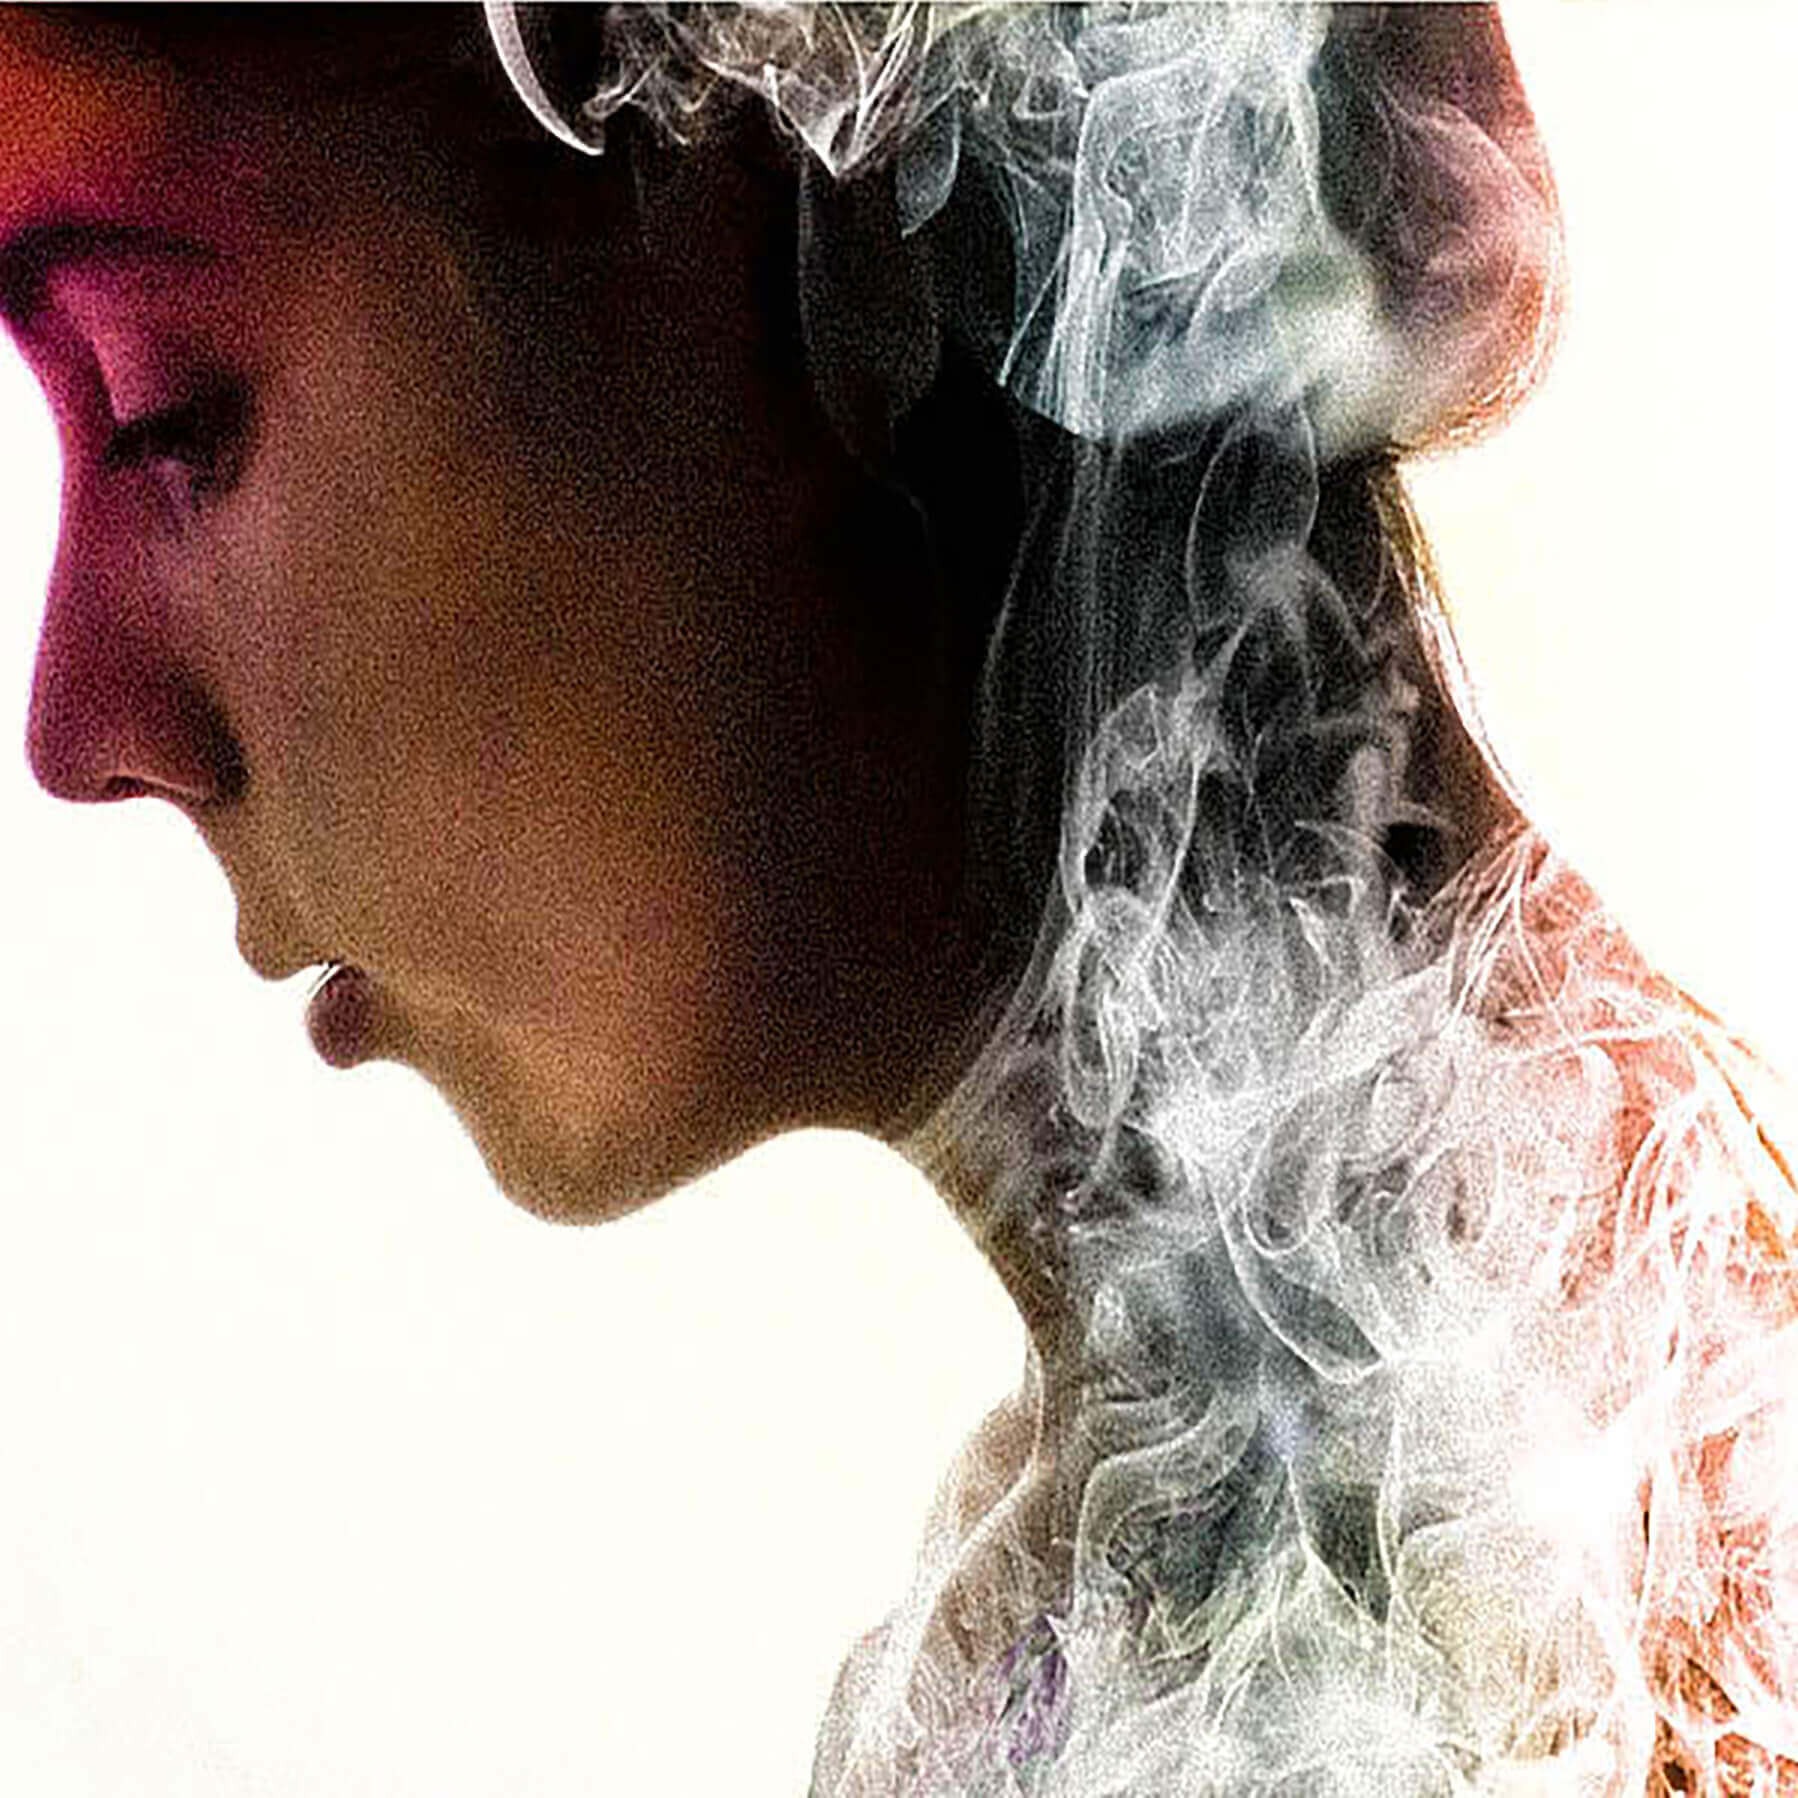 Double Exposure: Smoke on Face